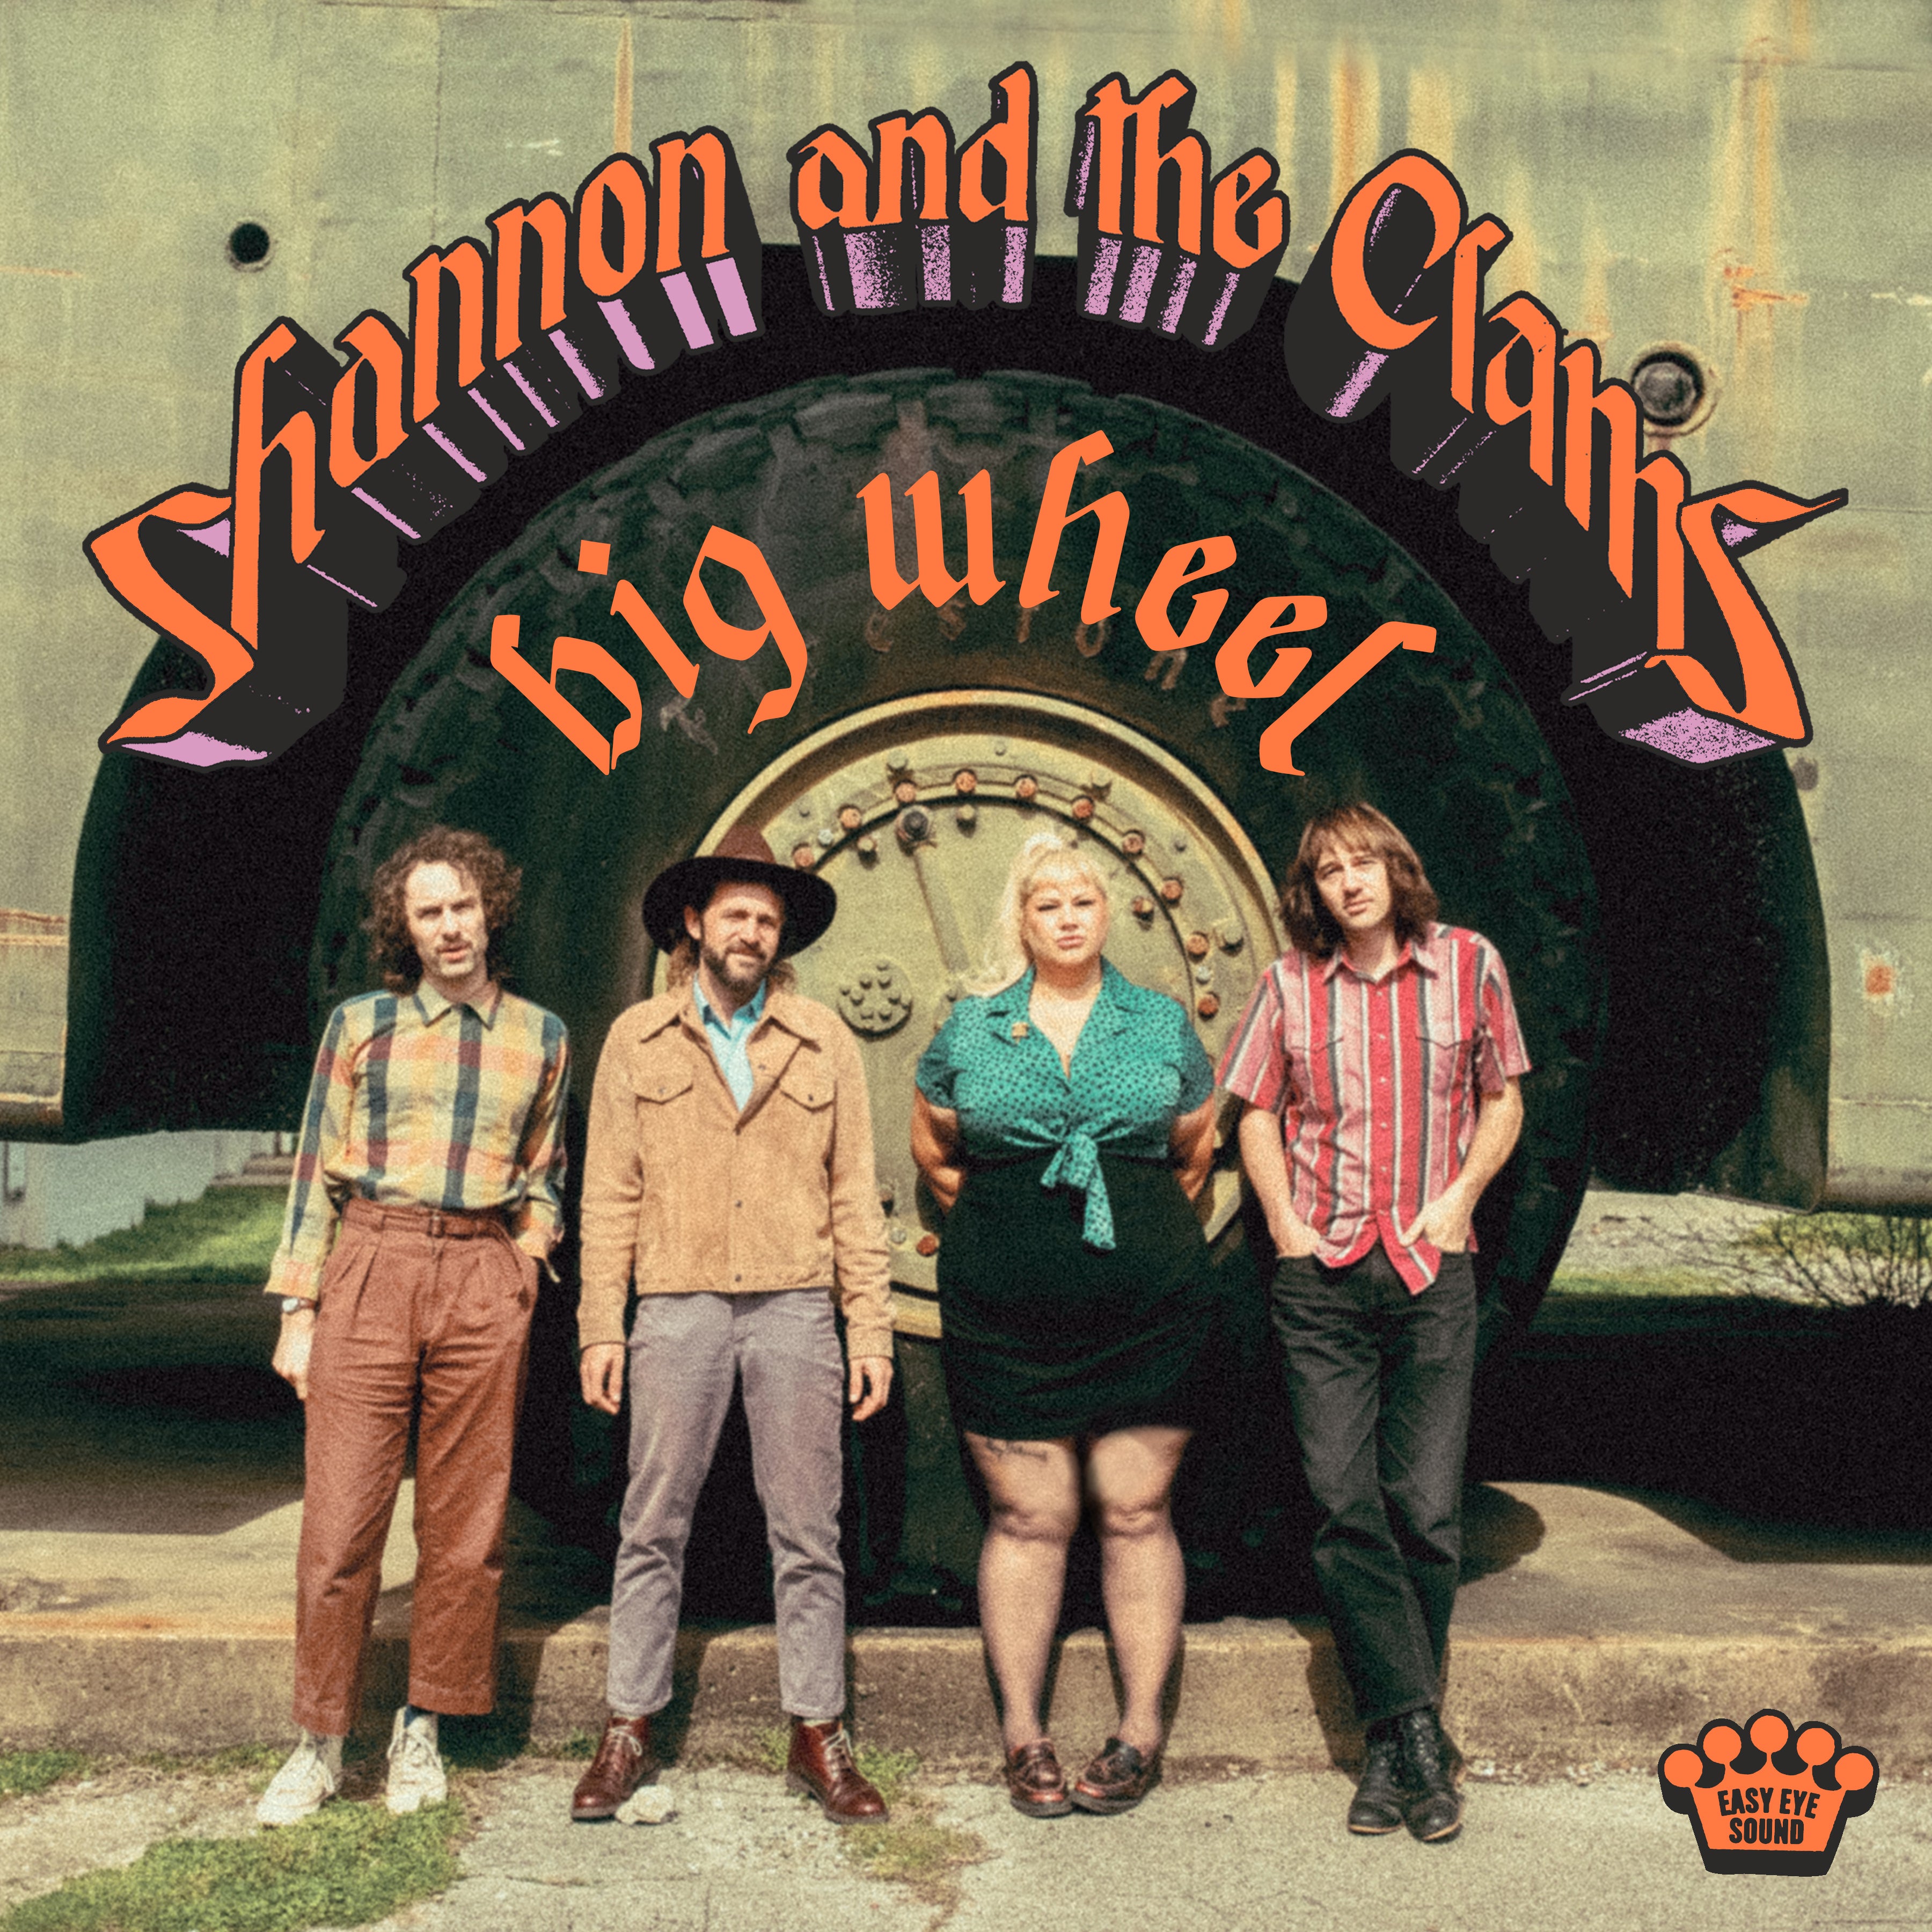 "Big Wheel" by Shannon & The Clams streaming everywhere now!